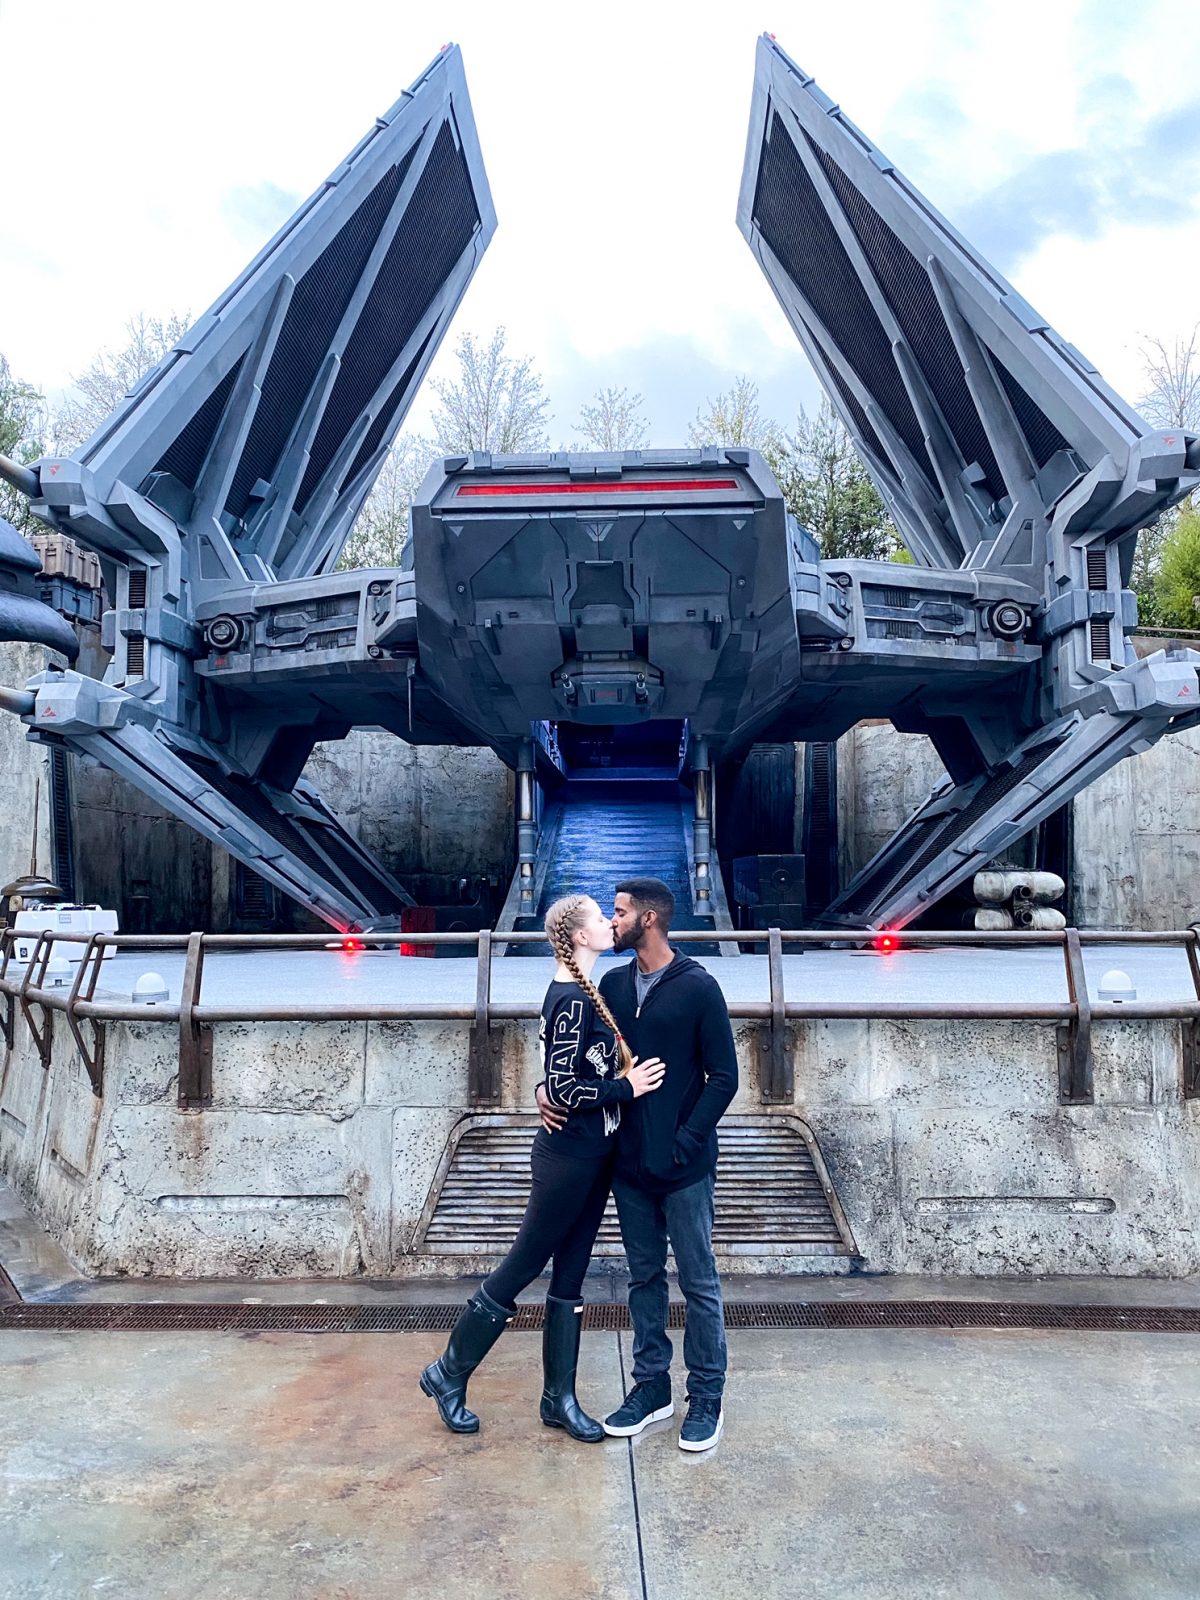 Victoria and Terrance kissing in font of Galaxy's Edge, another iconic location for Disneys Memory Maker 